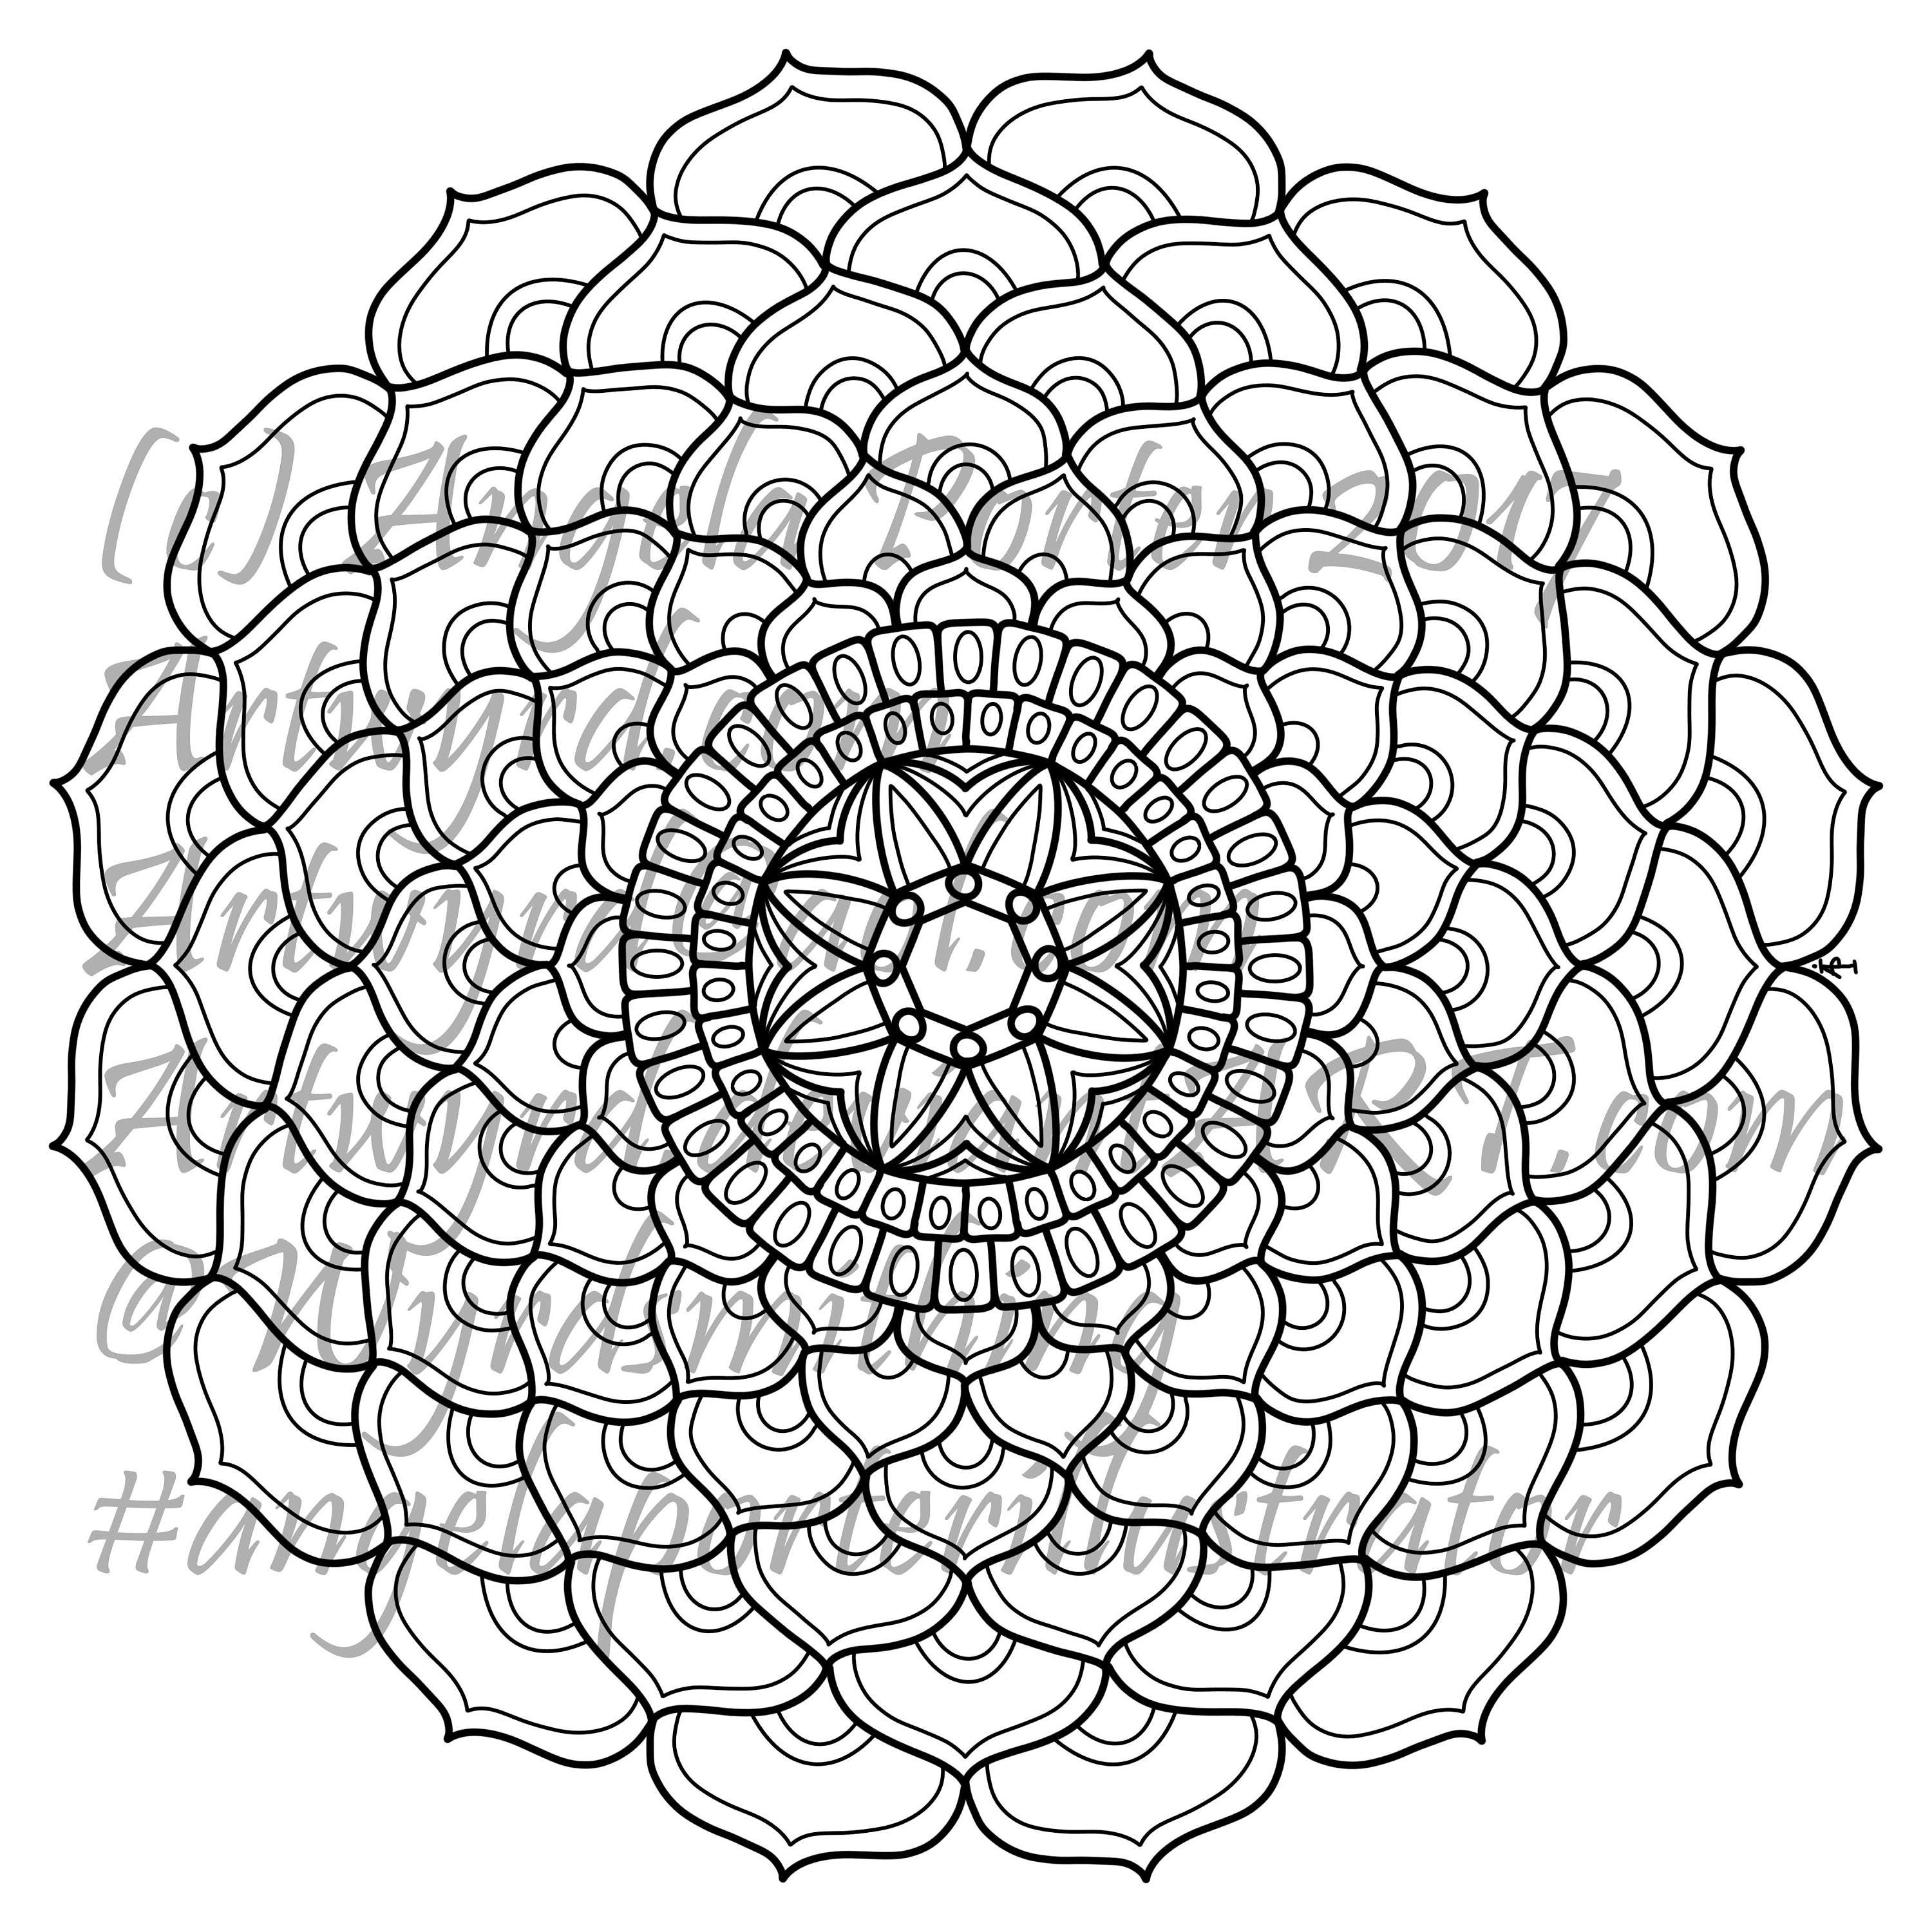 Download Succulent Mandala Colouring Page by Angela Porter | Etsy